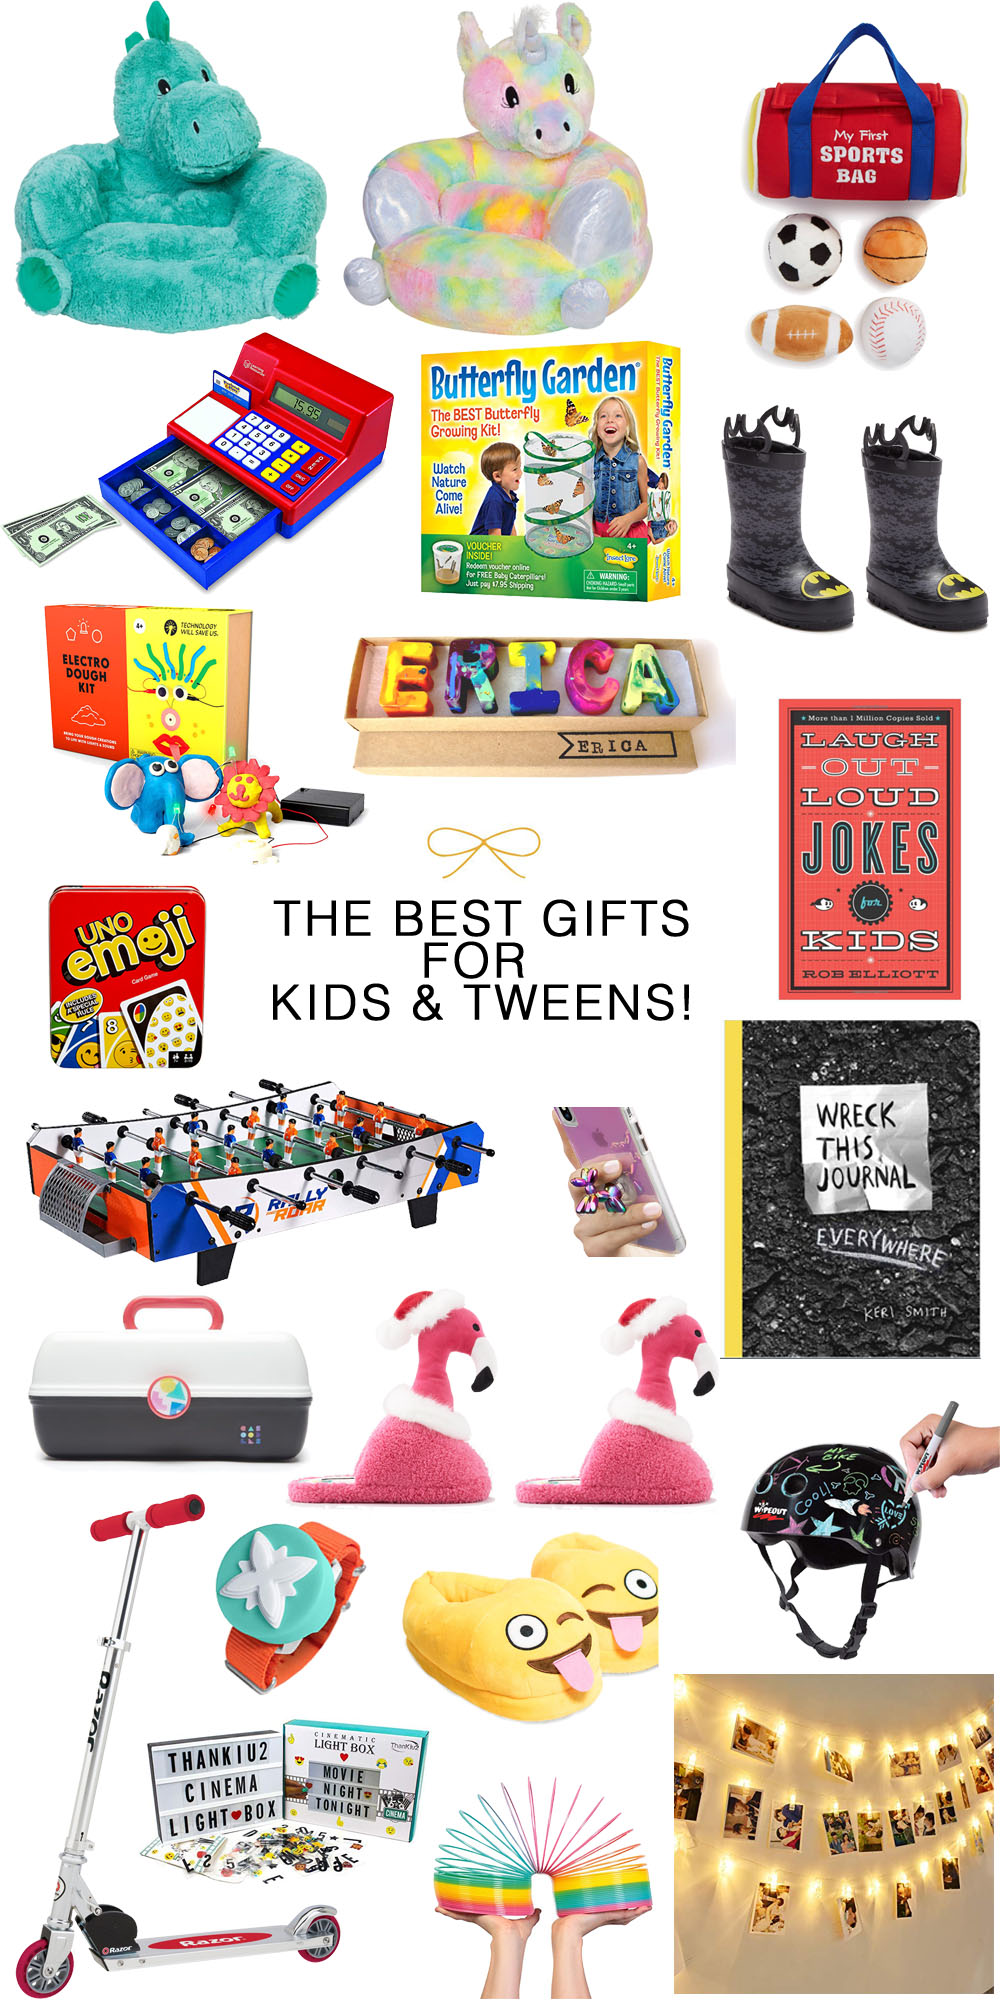 The best and most creative gifts for kids and tweens #giftguide #holidaygifts